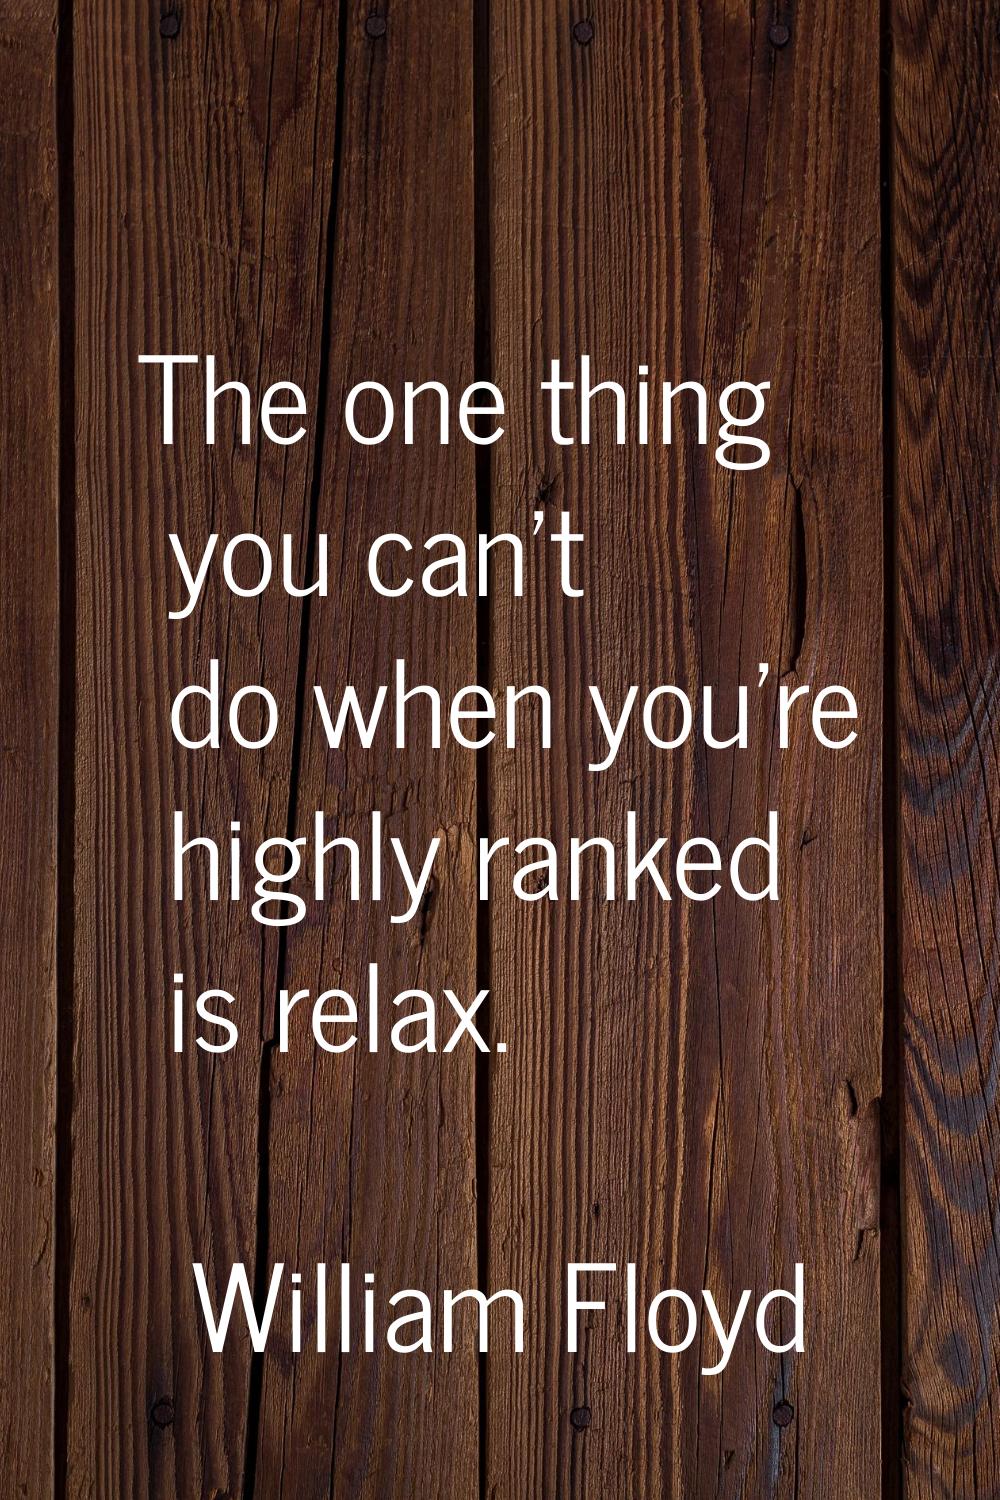 The one thing you can't do when you're highly ranked is relax.